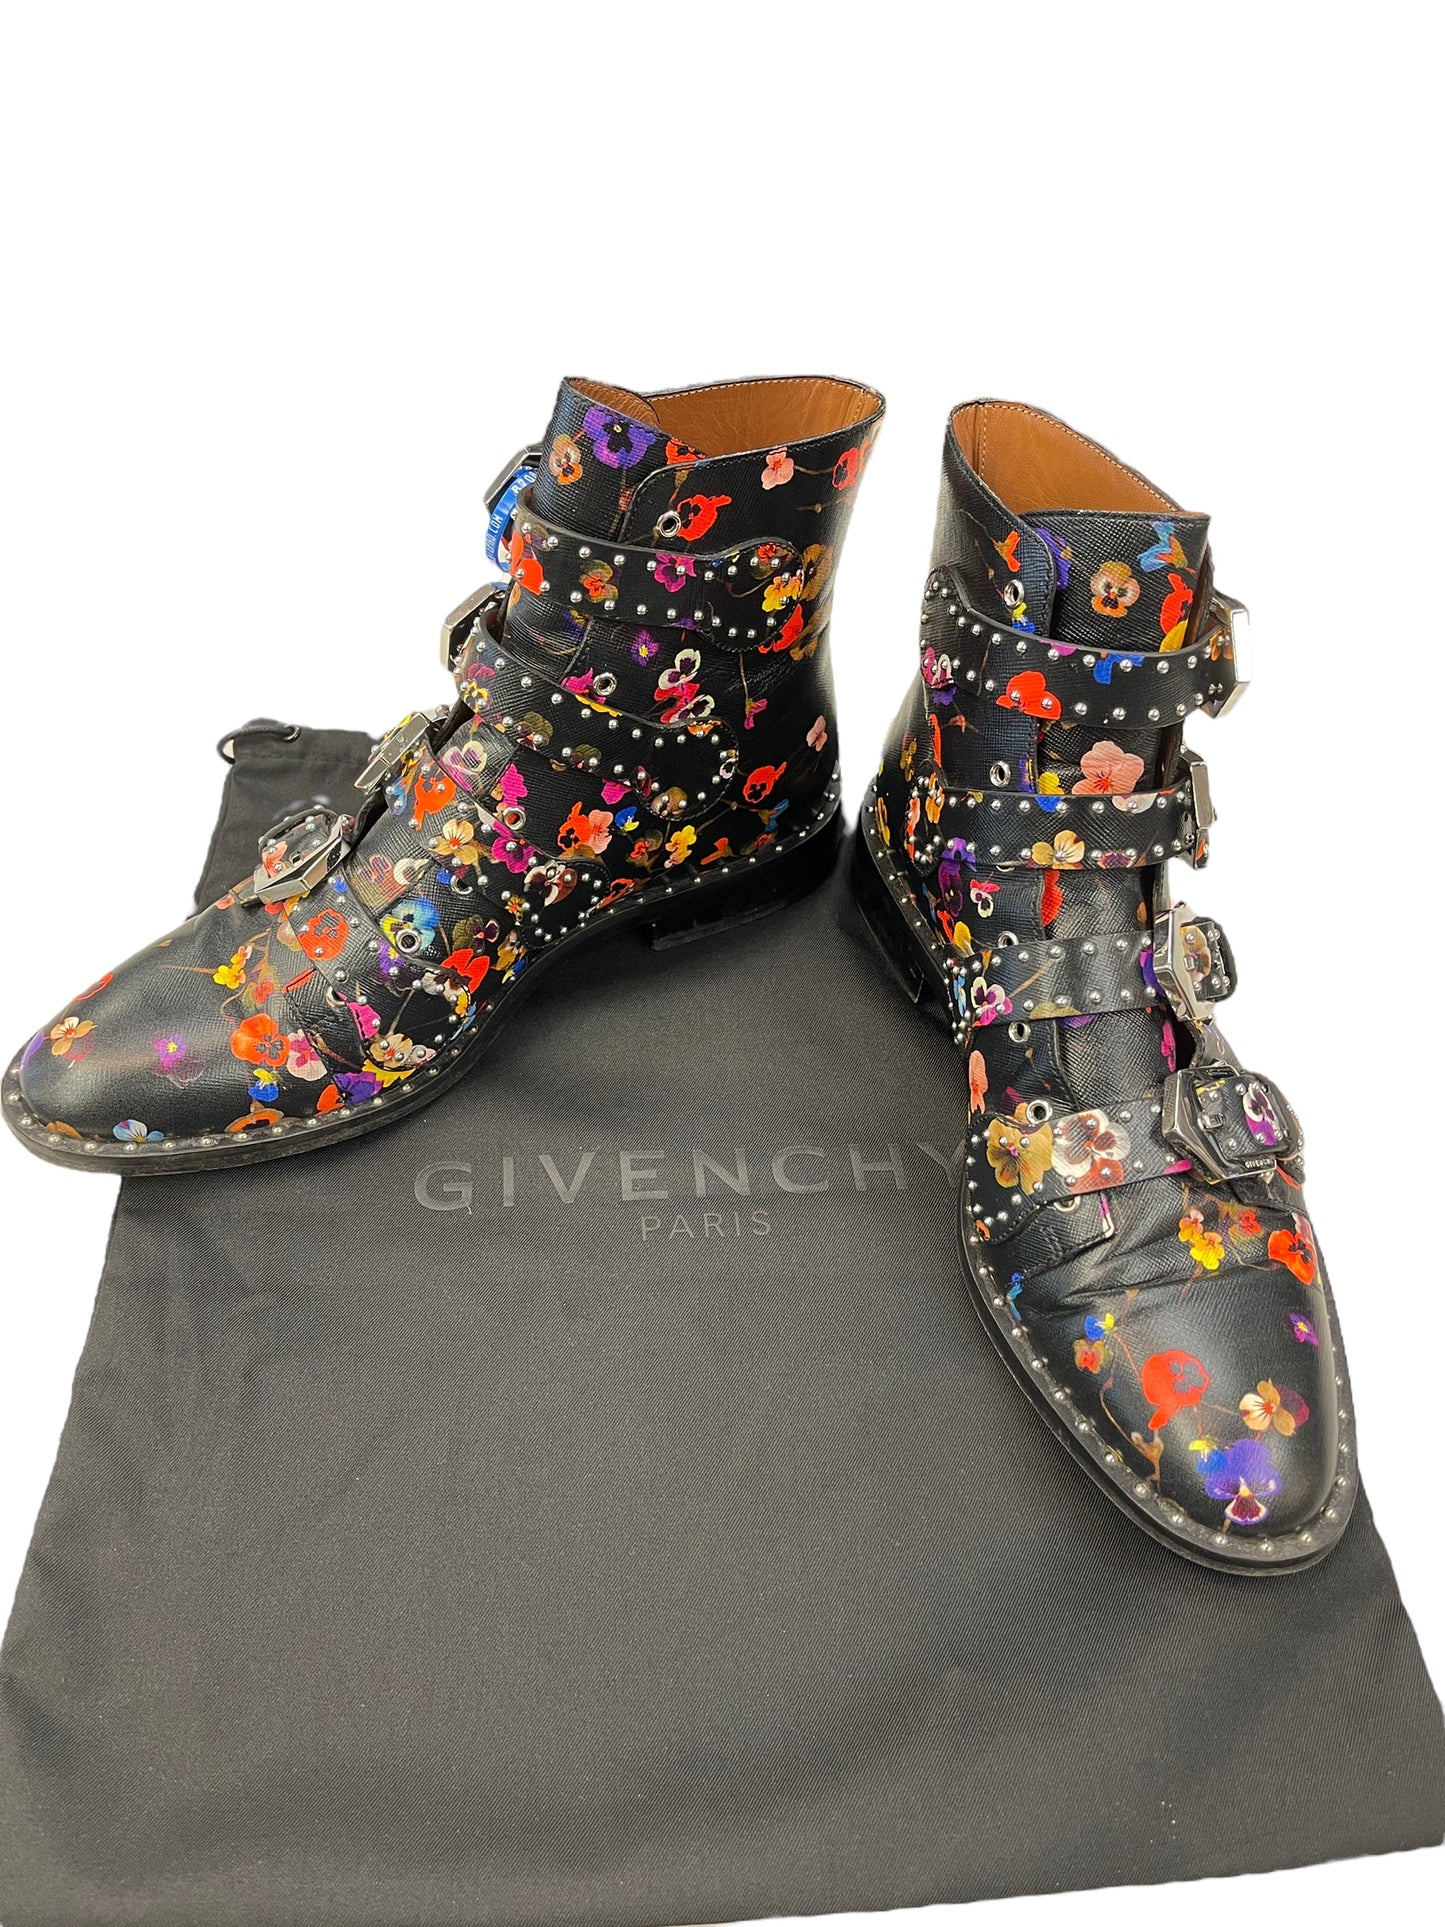 Boots Designer By Givenchy  Size: 10